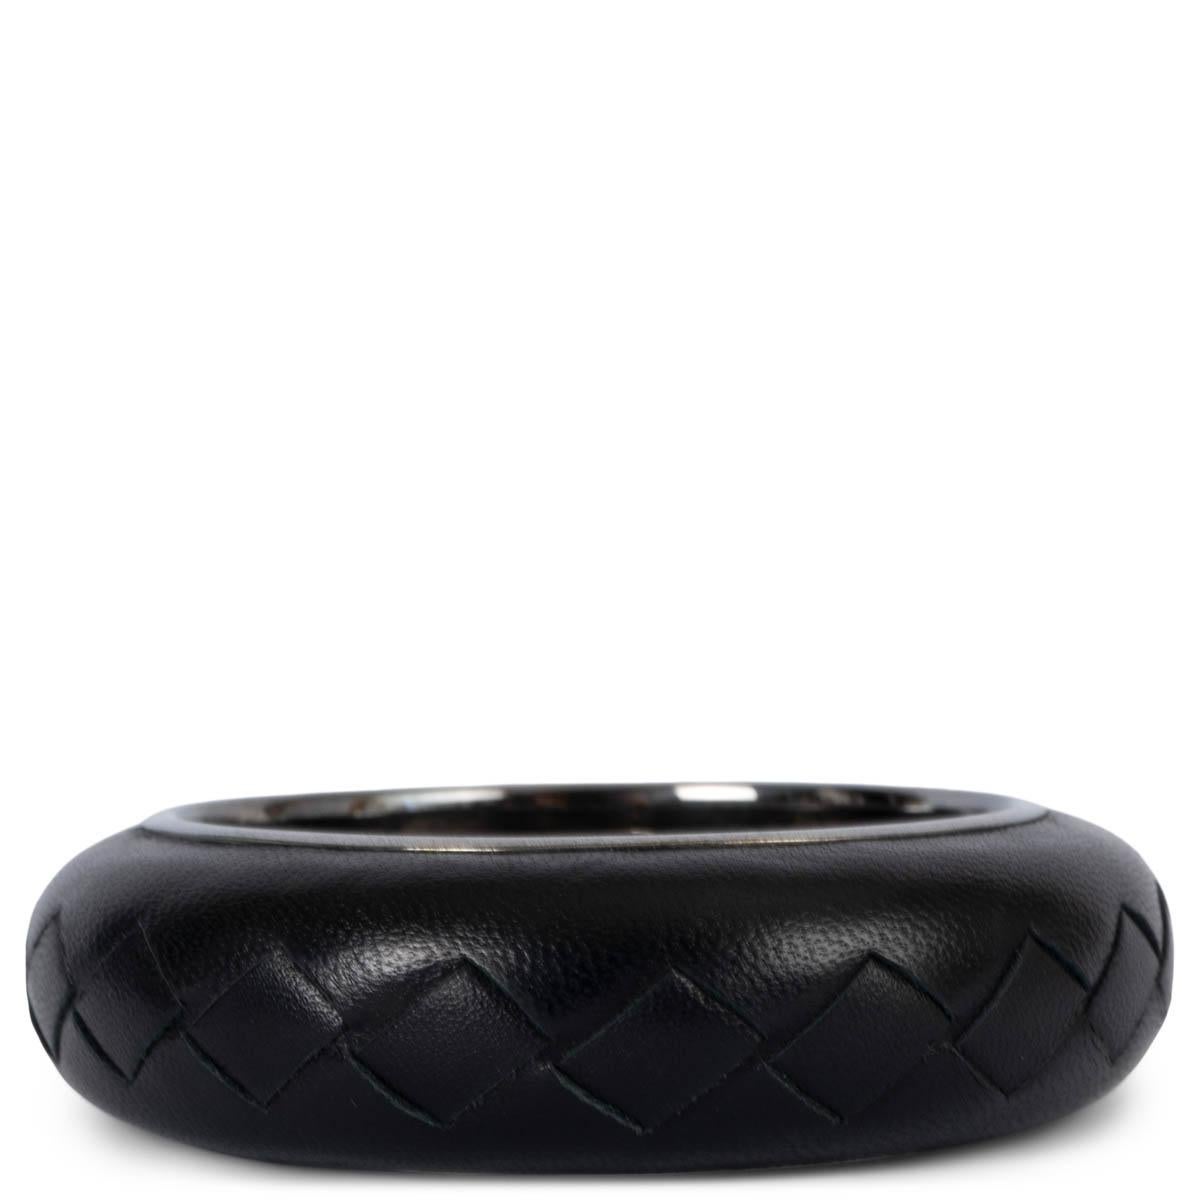 100% authentic Bottega Veneta Intrecciato bangle. Features a black braided leather body with sterling silver spring closure. Has been worn and is in excellent condition. 

Measurements
Width	2.3cm (0.9in)
Circumference	2.3cm